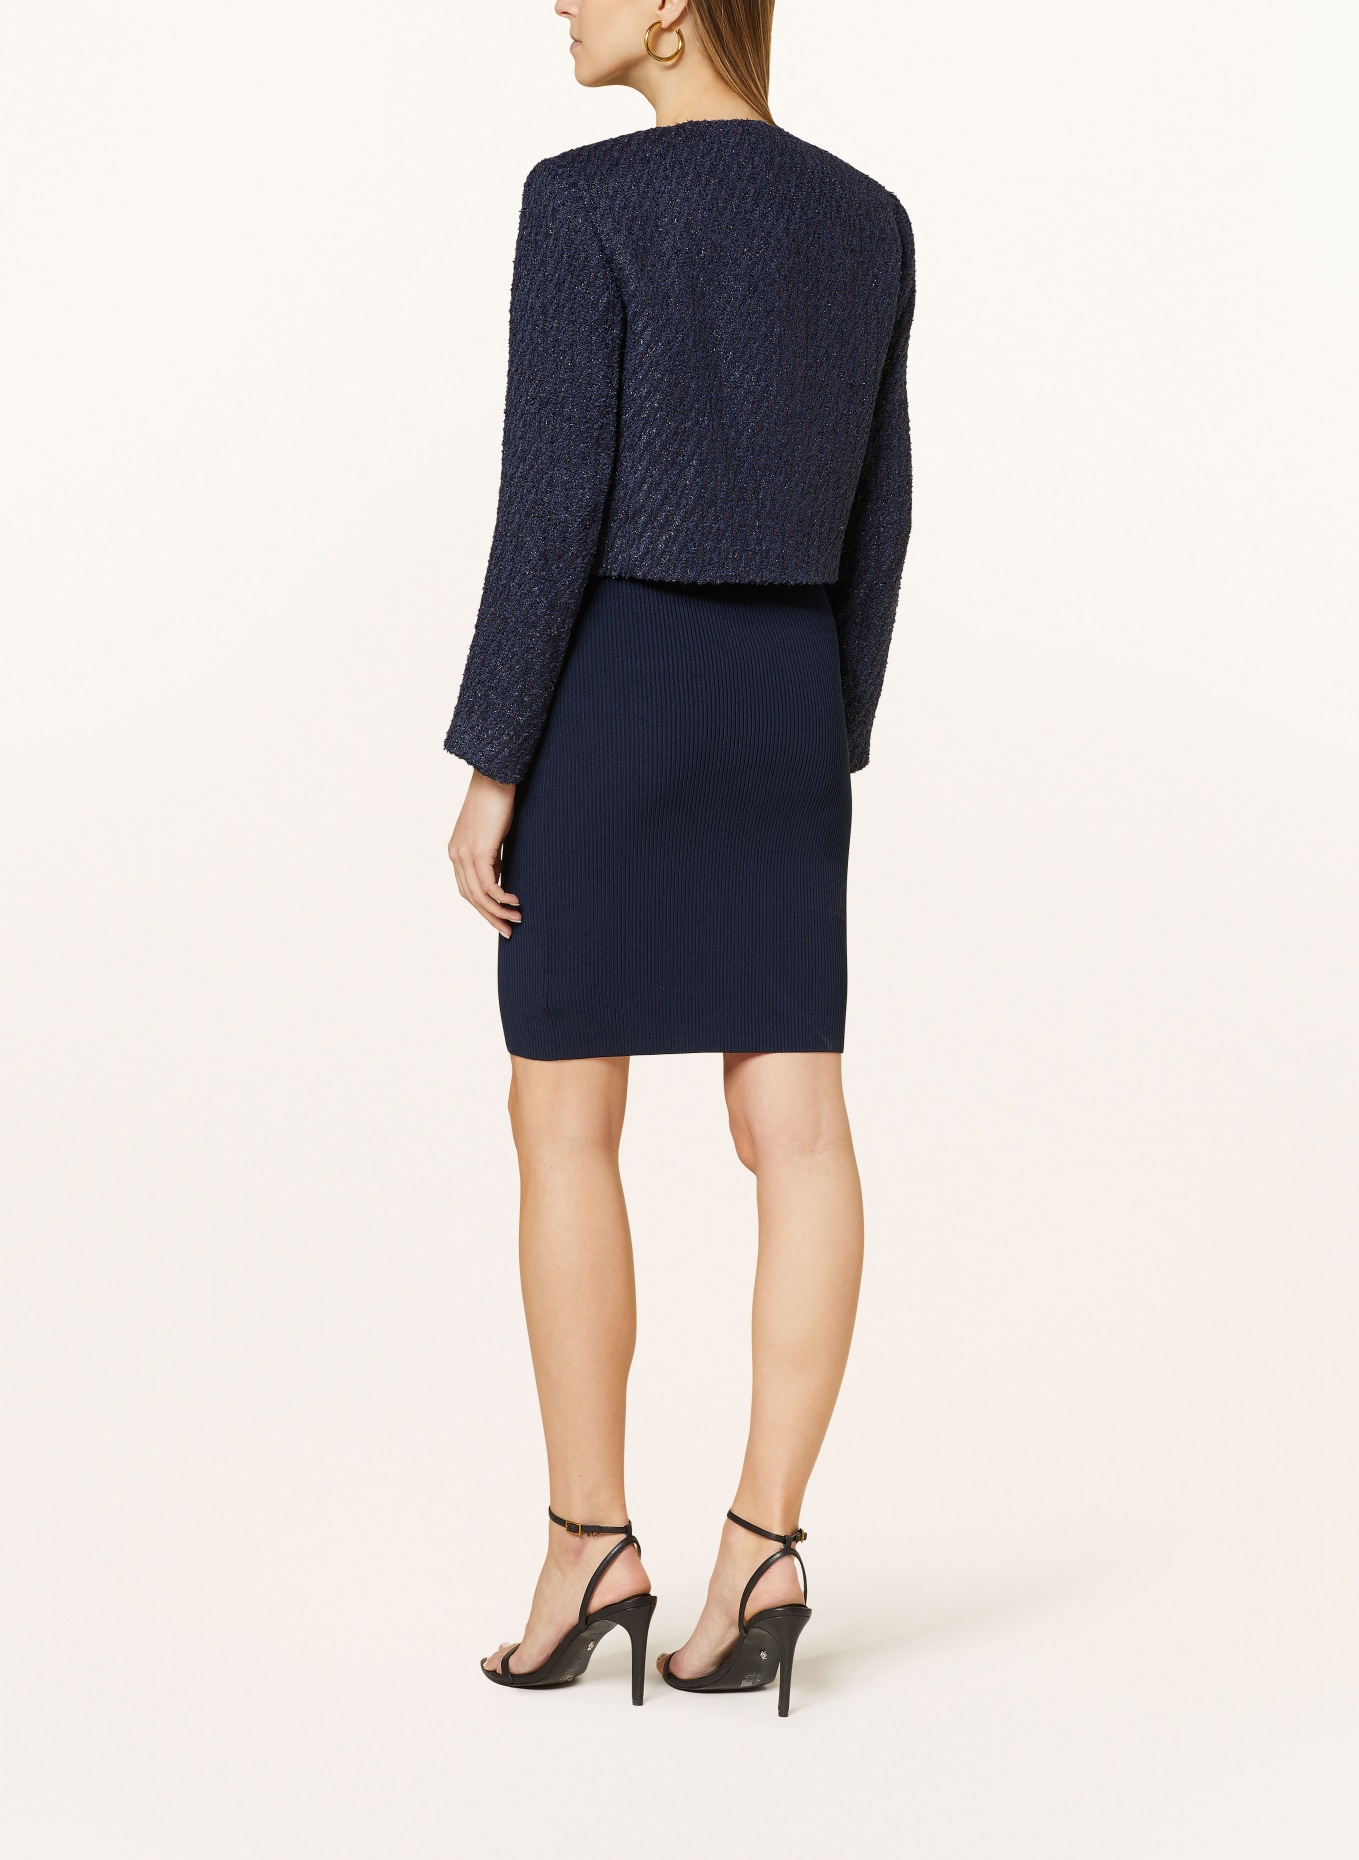 MICHAEL KORS Boxy jacket made of tweed with glitter thread, Color: DARK BLUE (Image 3)